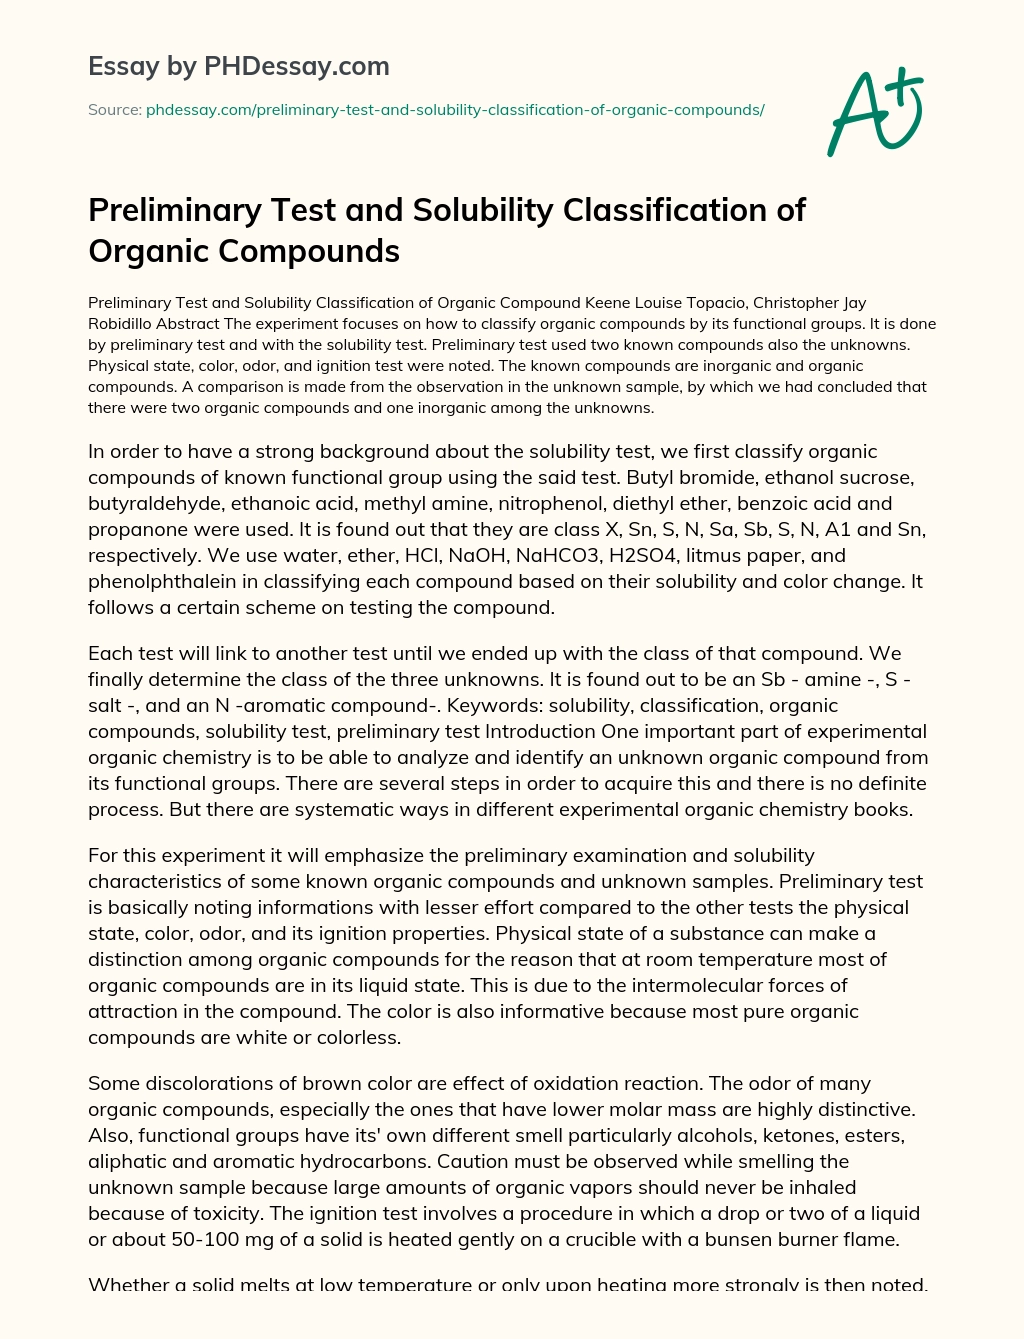 Preliminary Test and Solubility Classification of Organic Compounds essay